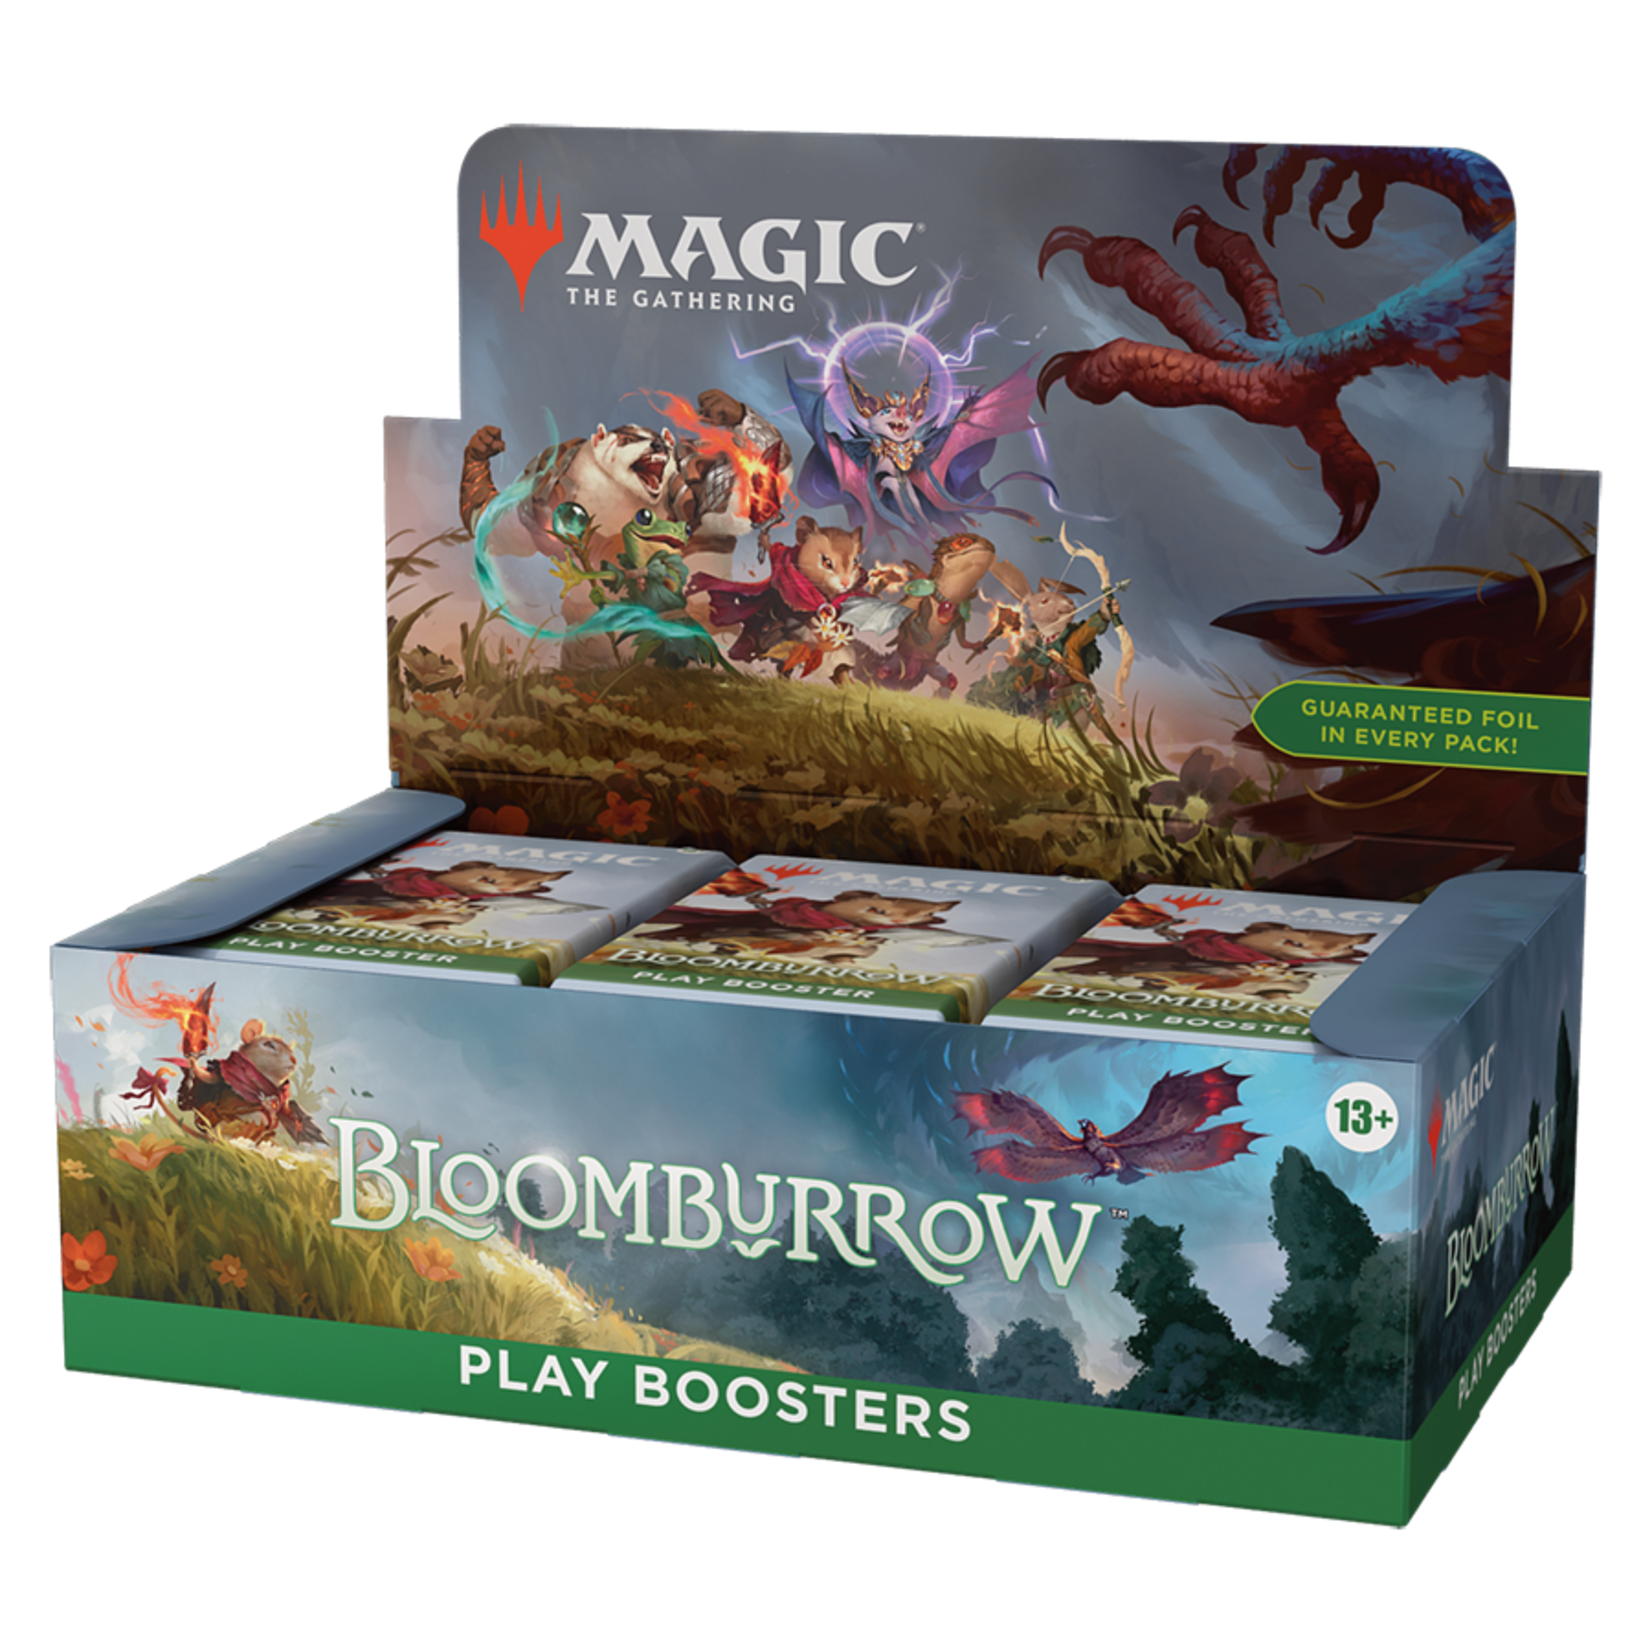 Magic: The Gathering Magic: The Gathering – Bloomburrow Play Booster Box